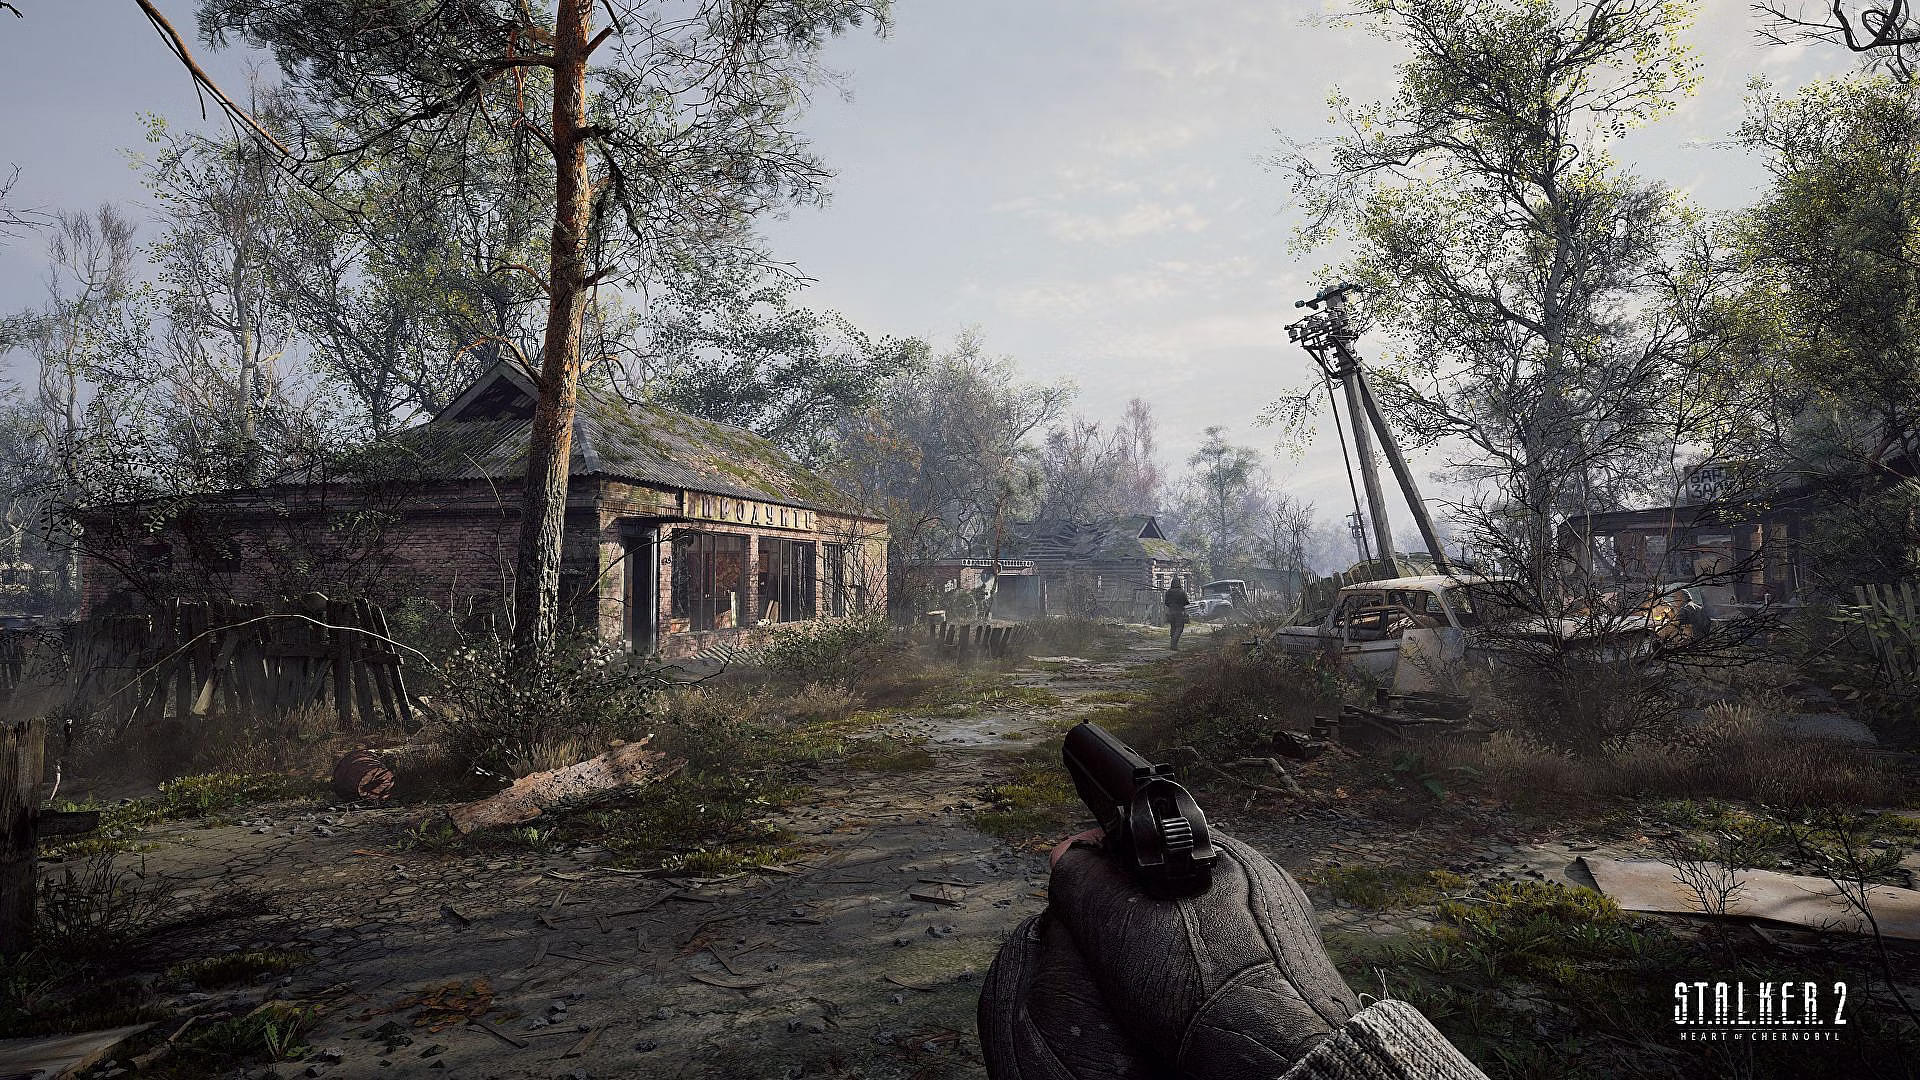 The player character holding a pistol in Stalker 2: Heart of Chornobyl